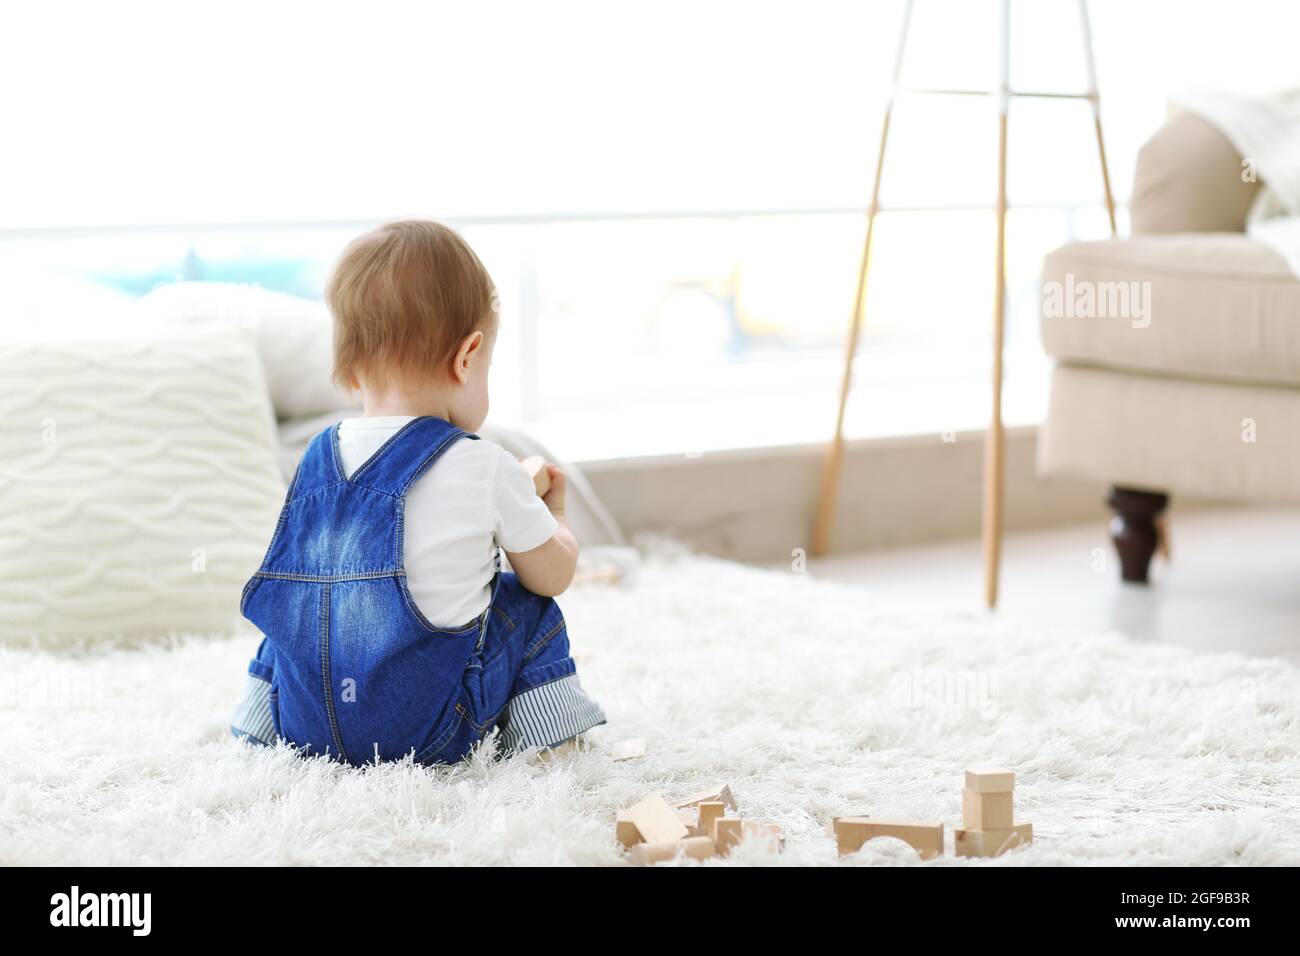 Baby playing with meccano on carpet Stock Photo - Alamy